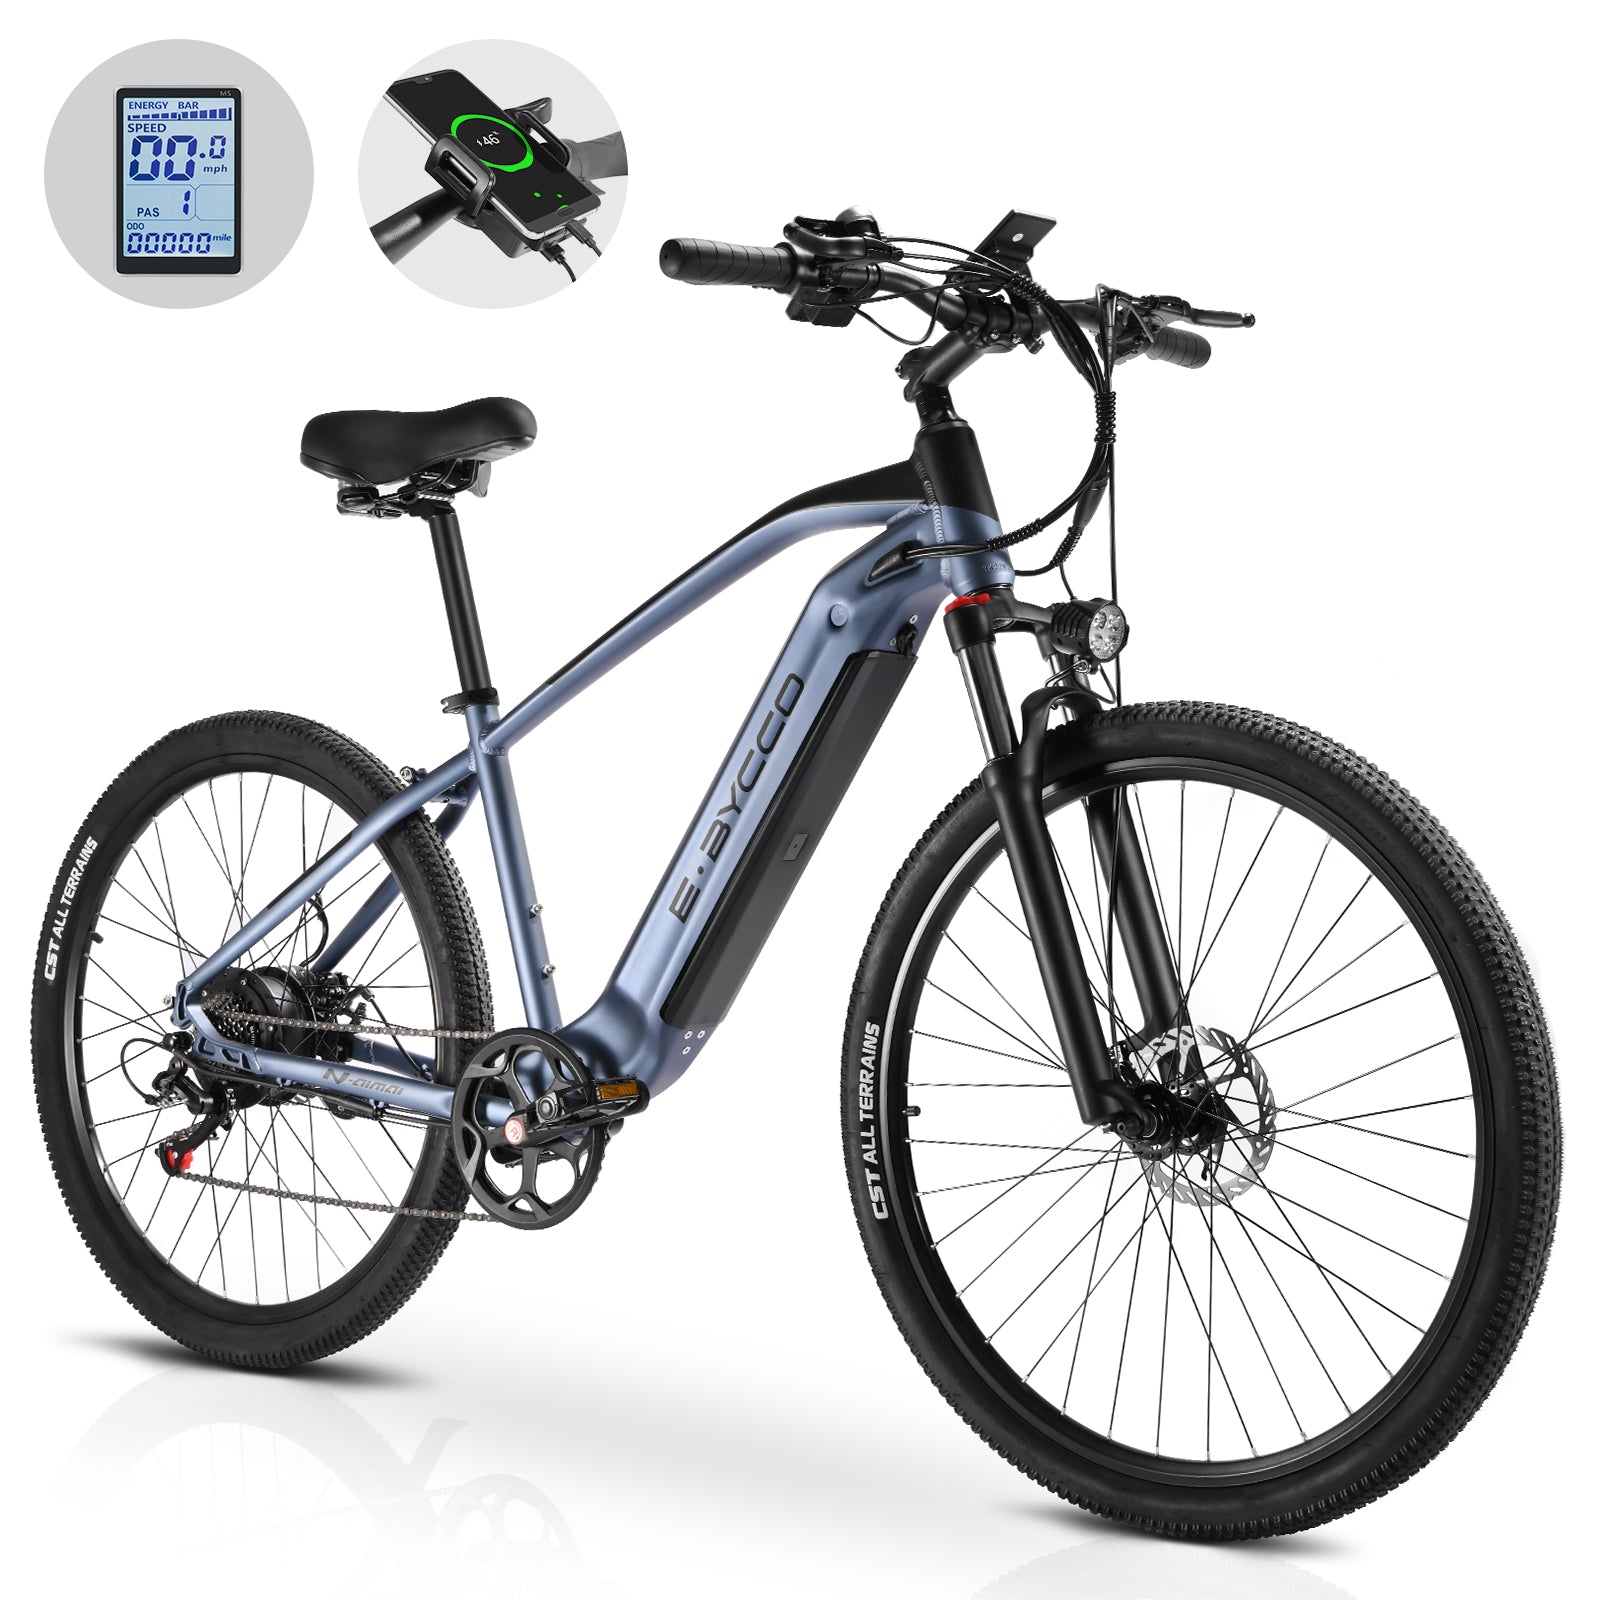 EBYCCO electric bicycle front fork/shock/suspension